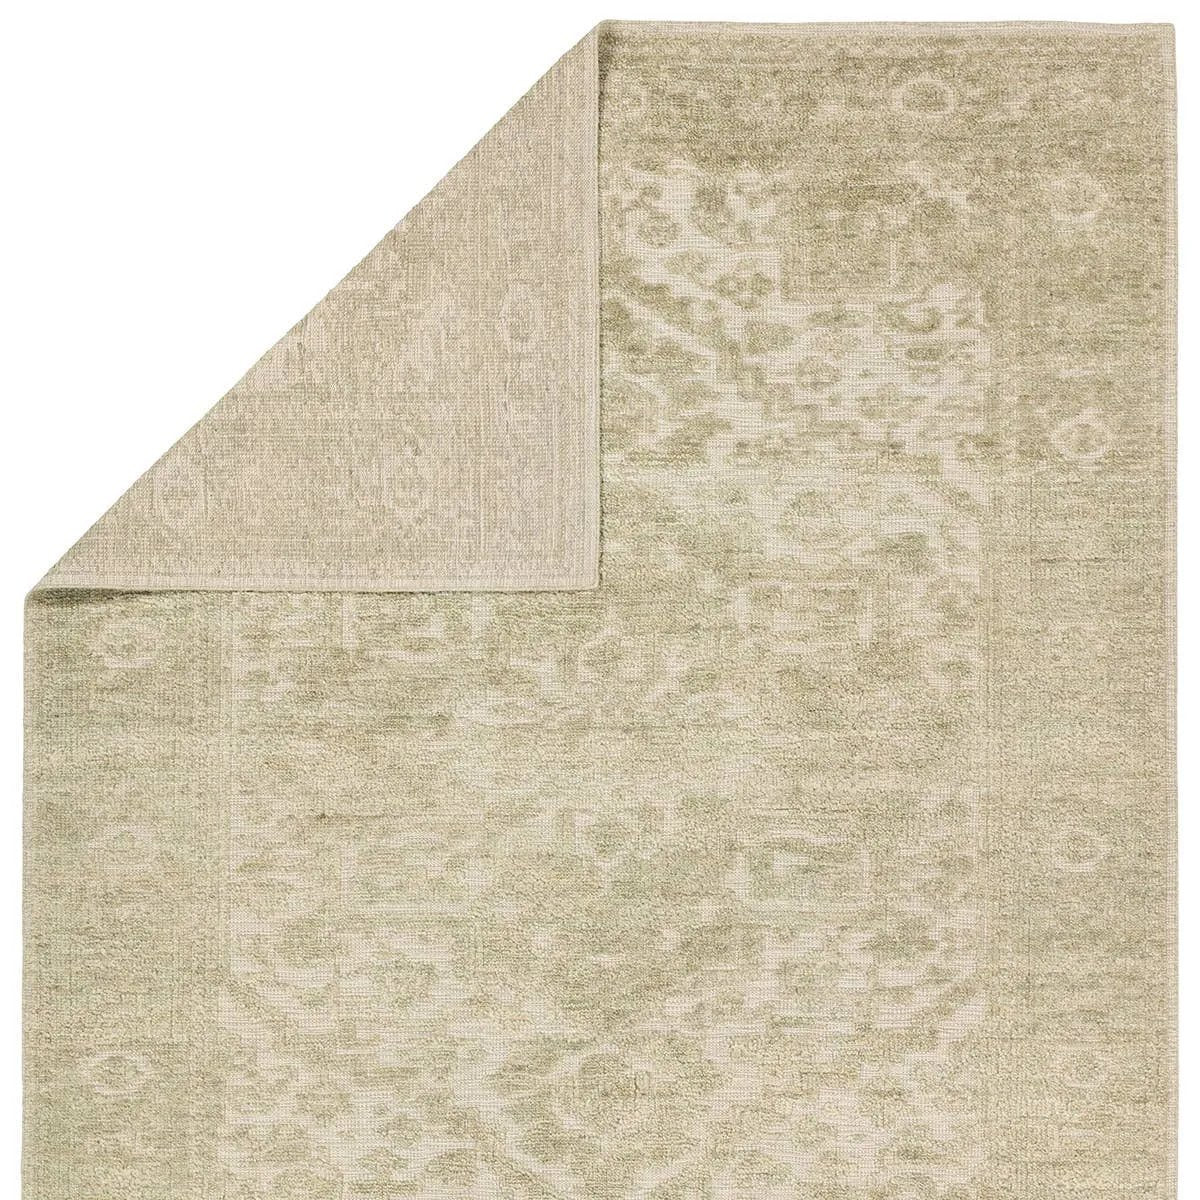 An extraordinary modern-day classic, the Pranhita rug’s sculptural hand-cut pile is plush, easy-to-care-for and stain resistant, but it is the impressive hand-knotted construction that sets it apart. Amethyst Home provides interior design, new home construction design consulting, vintage area rugs, and lighting in the Winter Garden metro area.